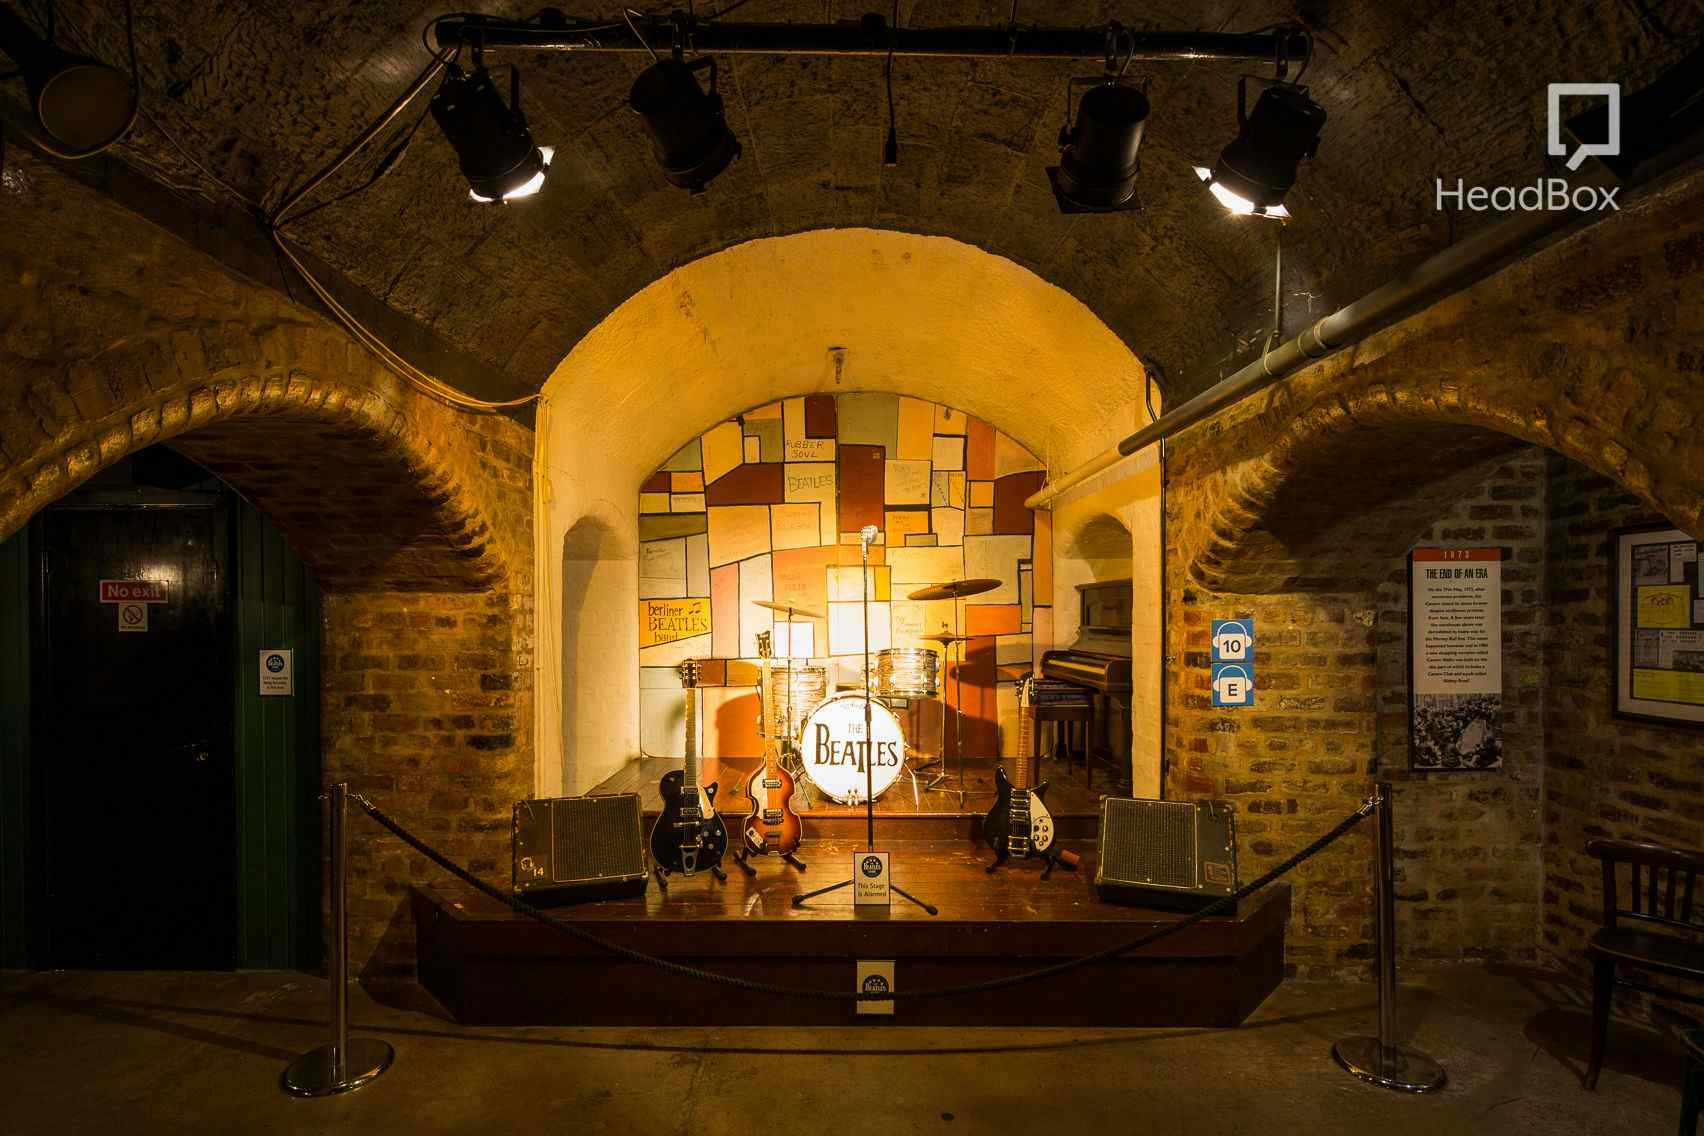 Cavern Club or Matthew Street or White Room, The Beatles Story